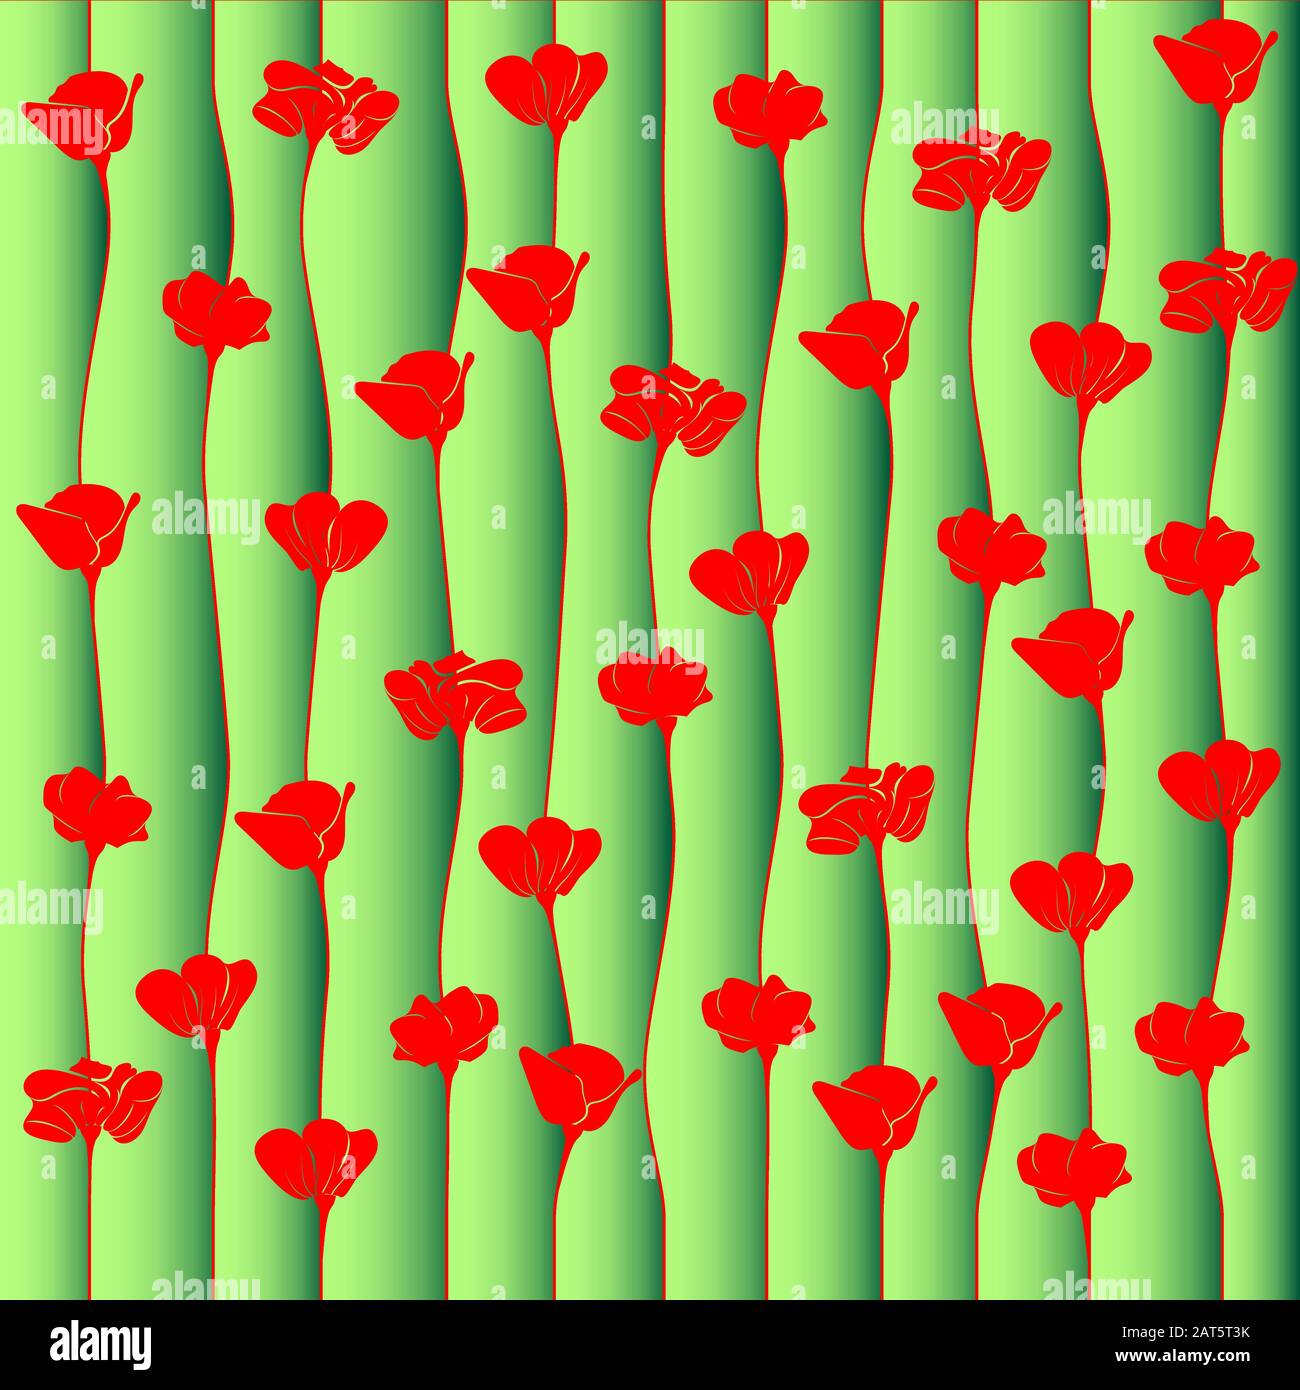 Seamless pattern of red poppy flowers on a gradient green background. Stock Vector